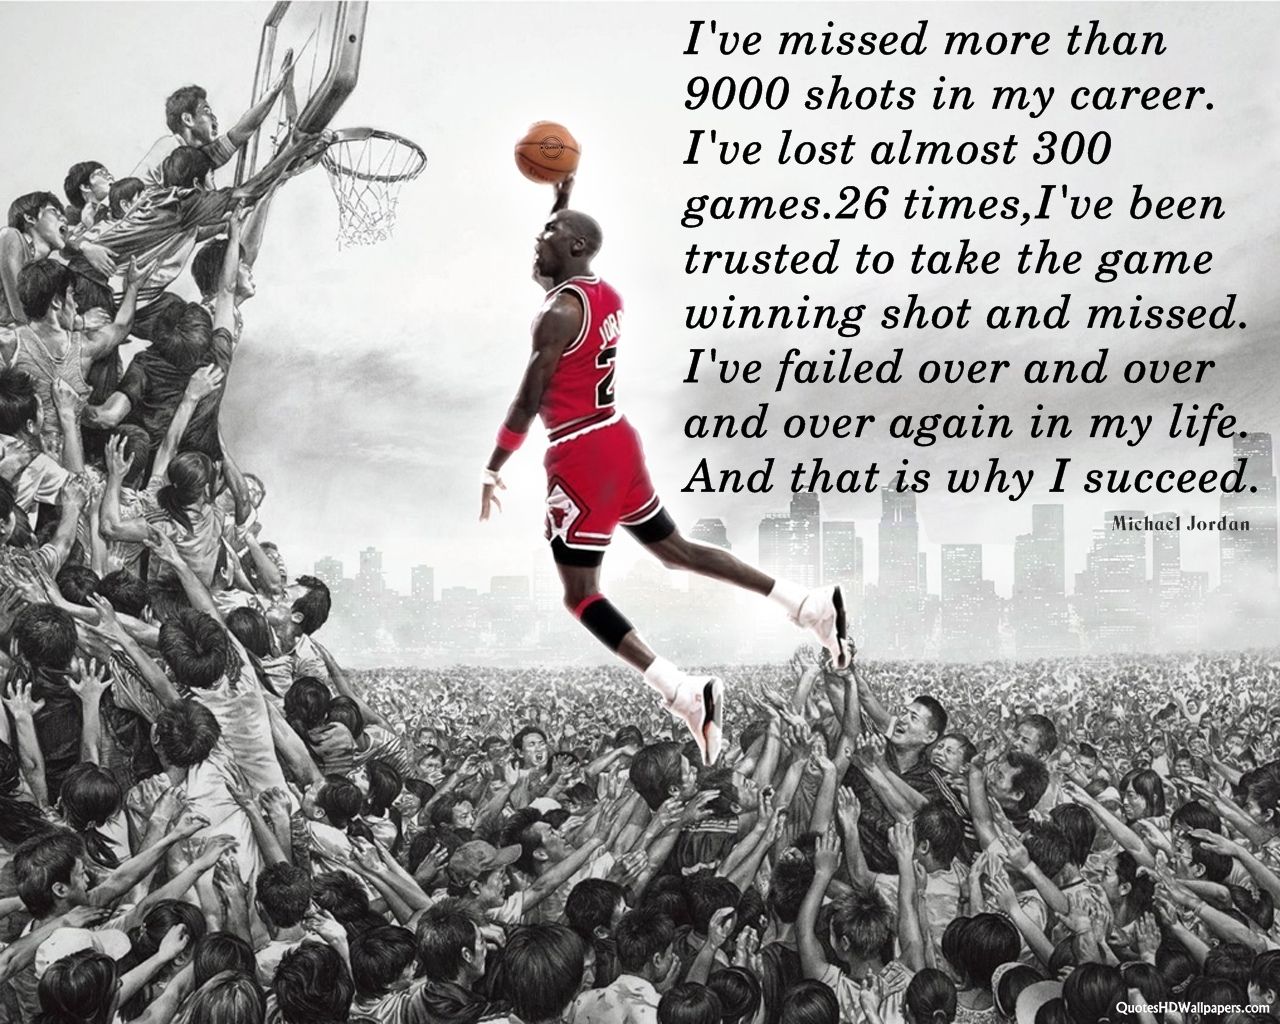 Basketball Motivational Quotes Wallpapers